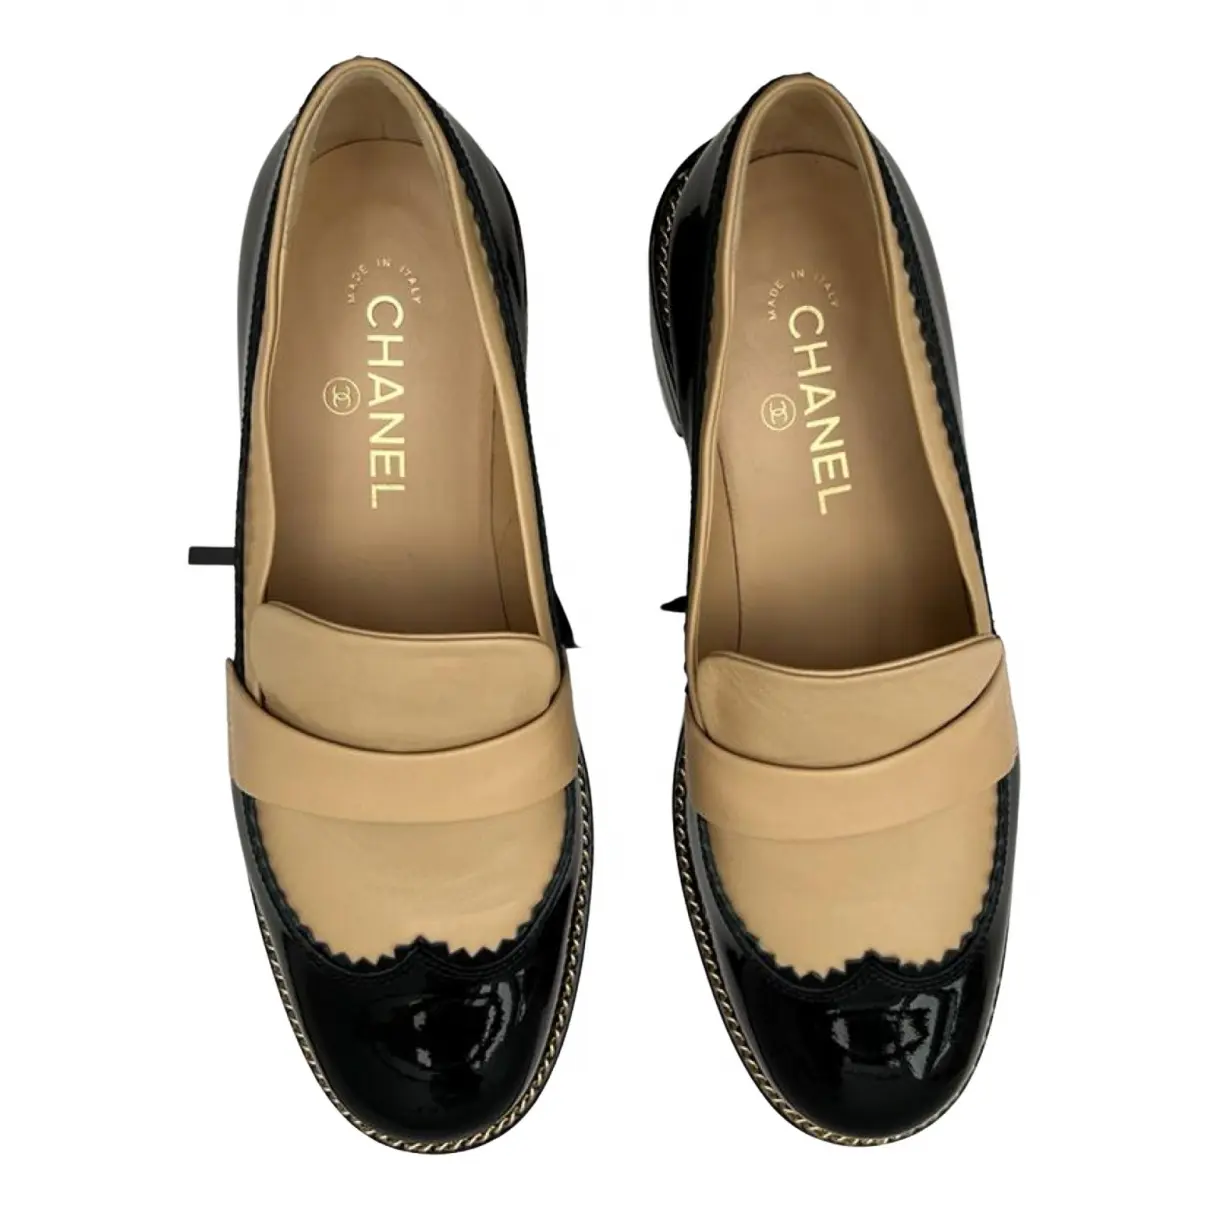 Buy Chanel Patent leather flats online